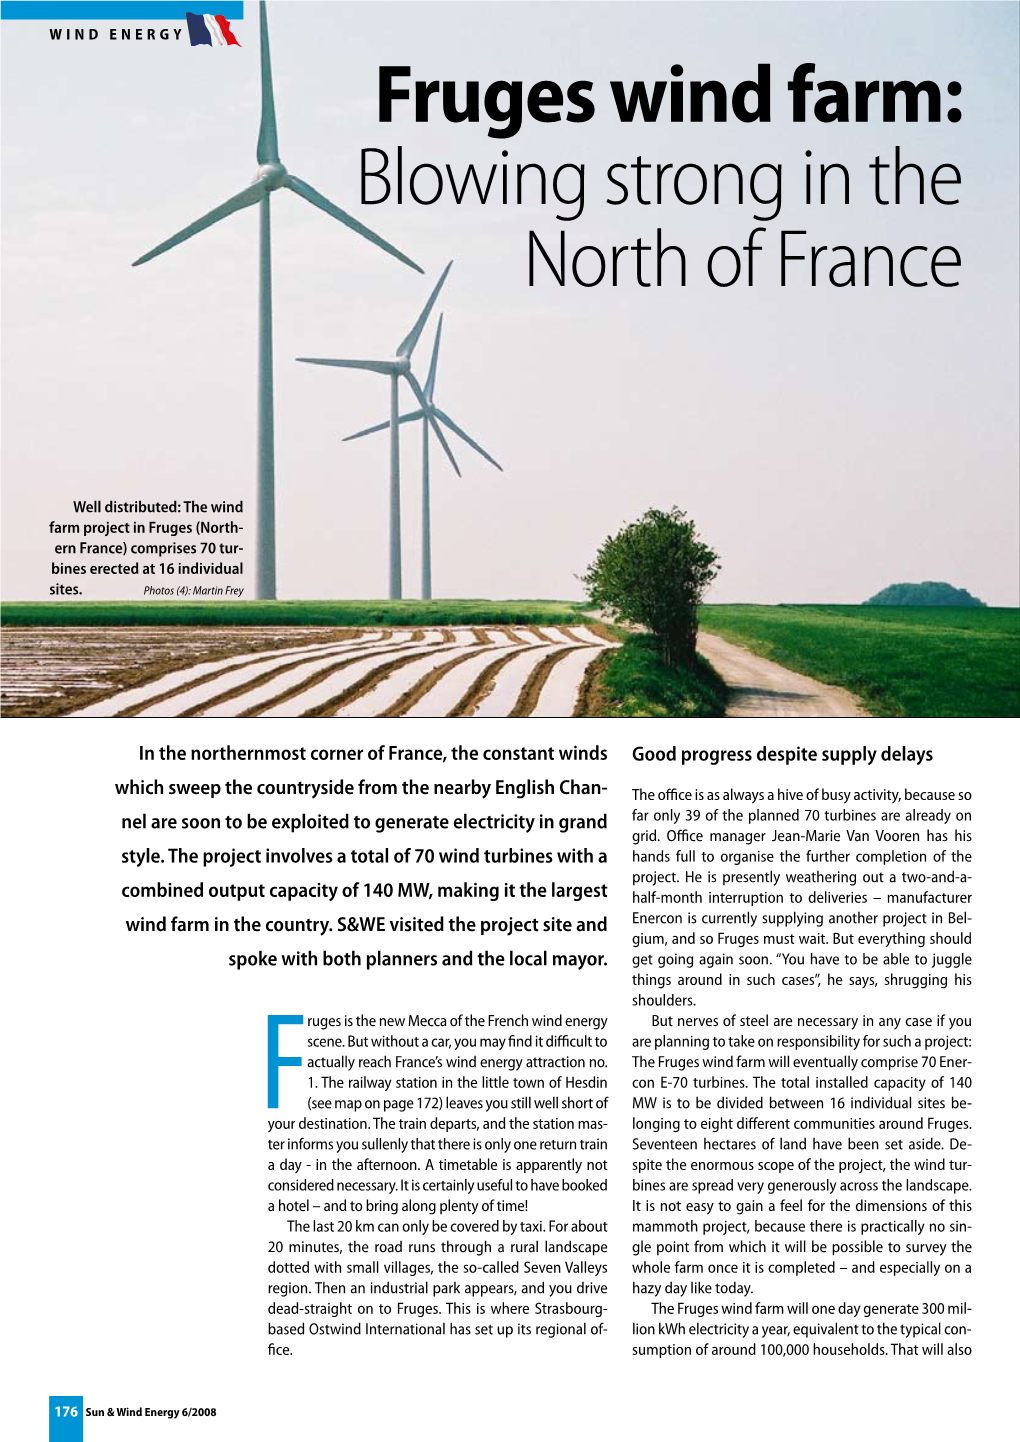 Fruges Wind Farm: Blowing Strong in the North of France